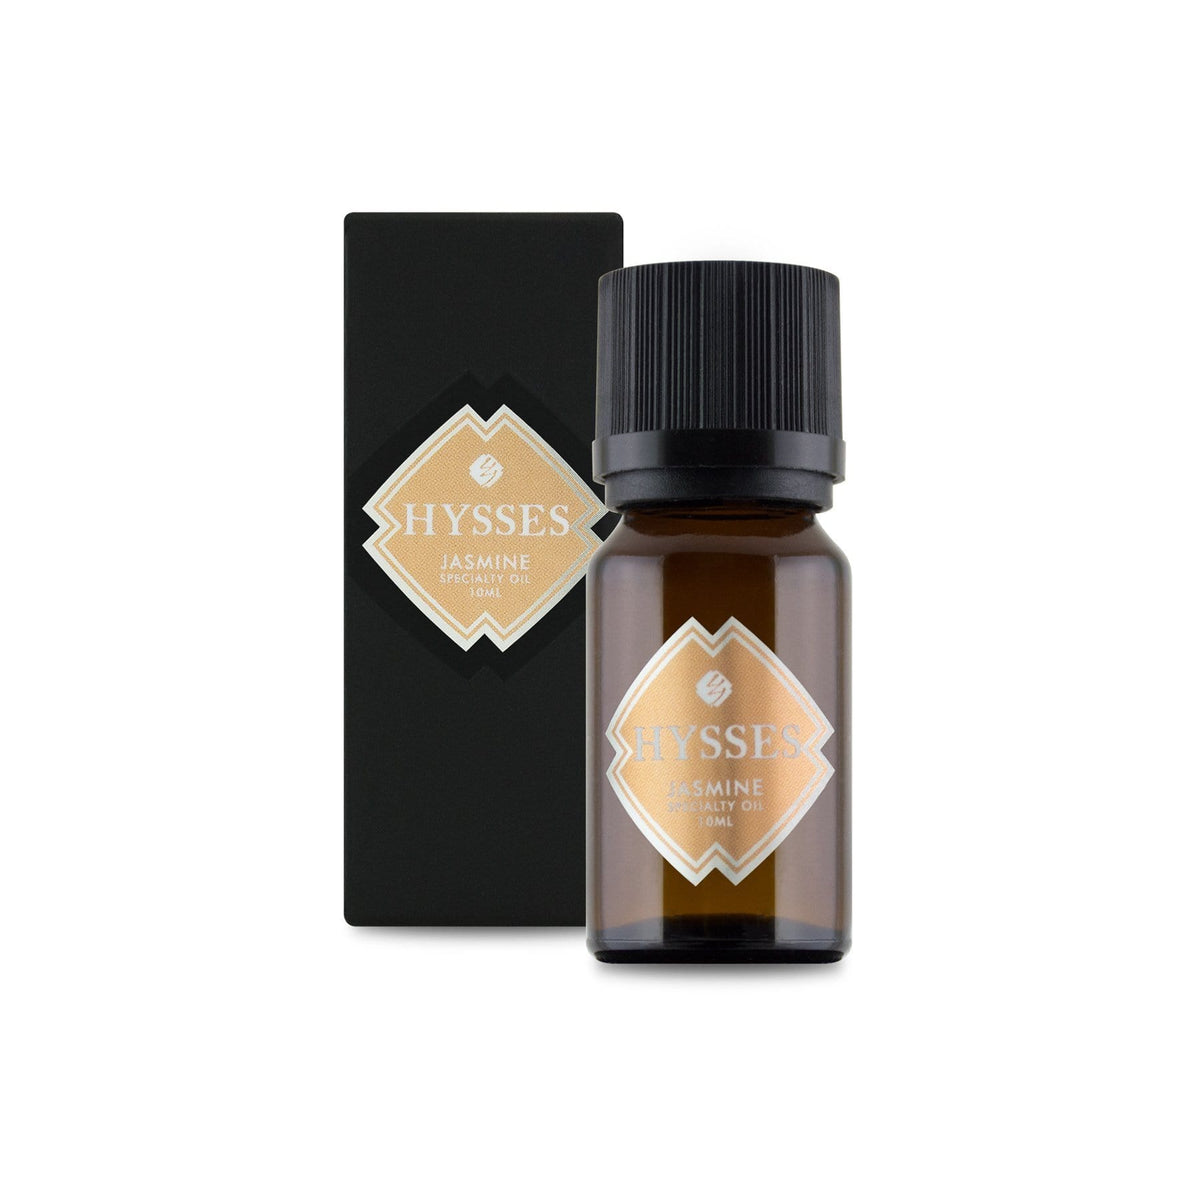 Hysses Essential Oil 10ml Specialty Oil Jasmine Absolute